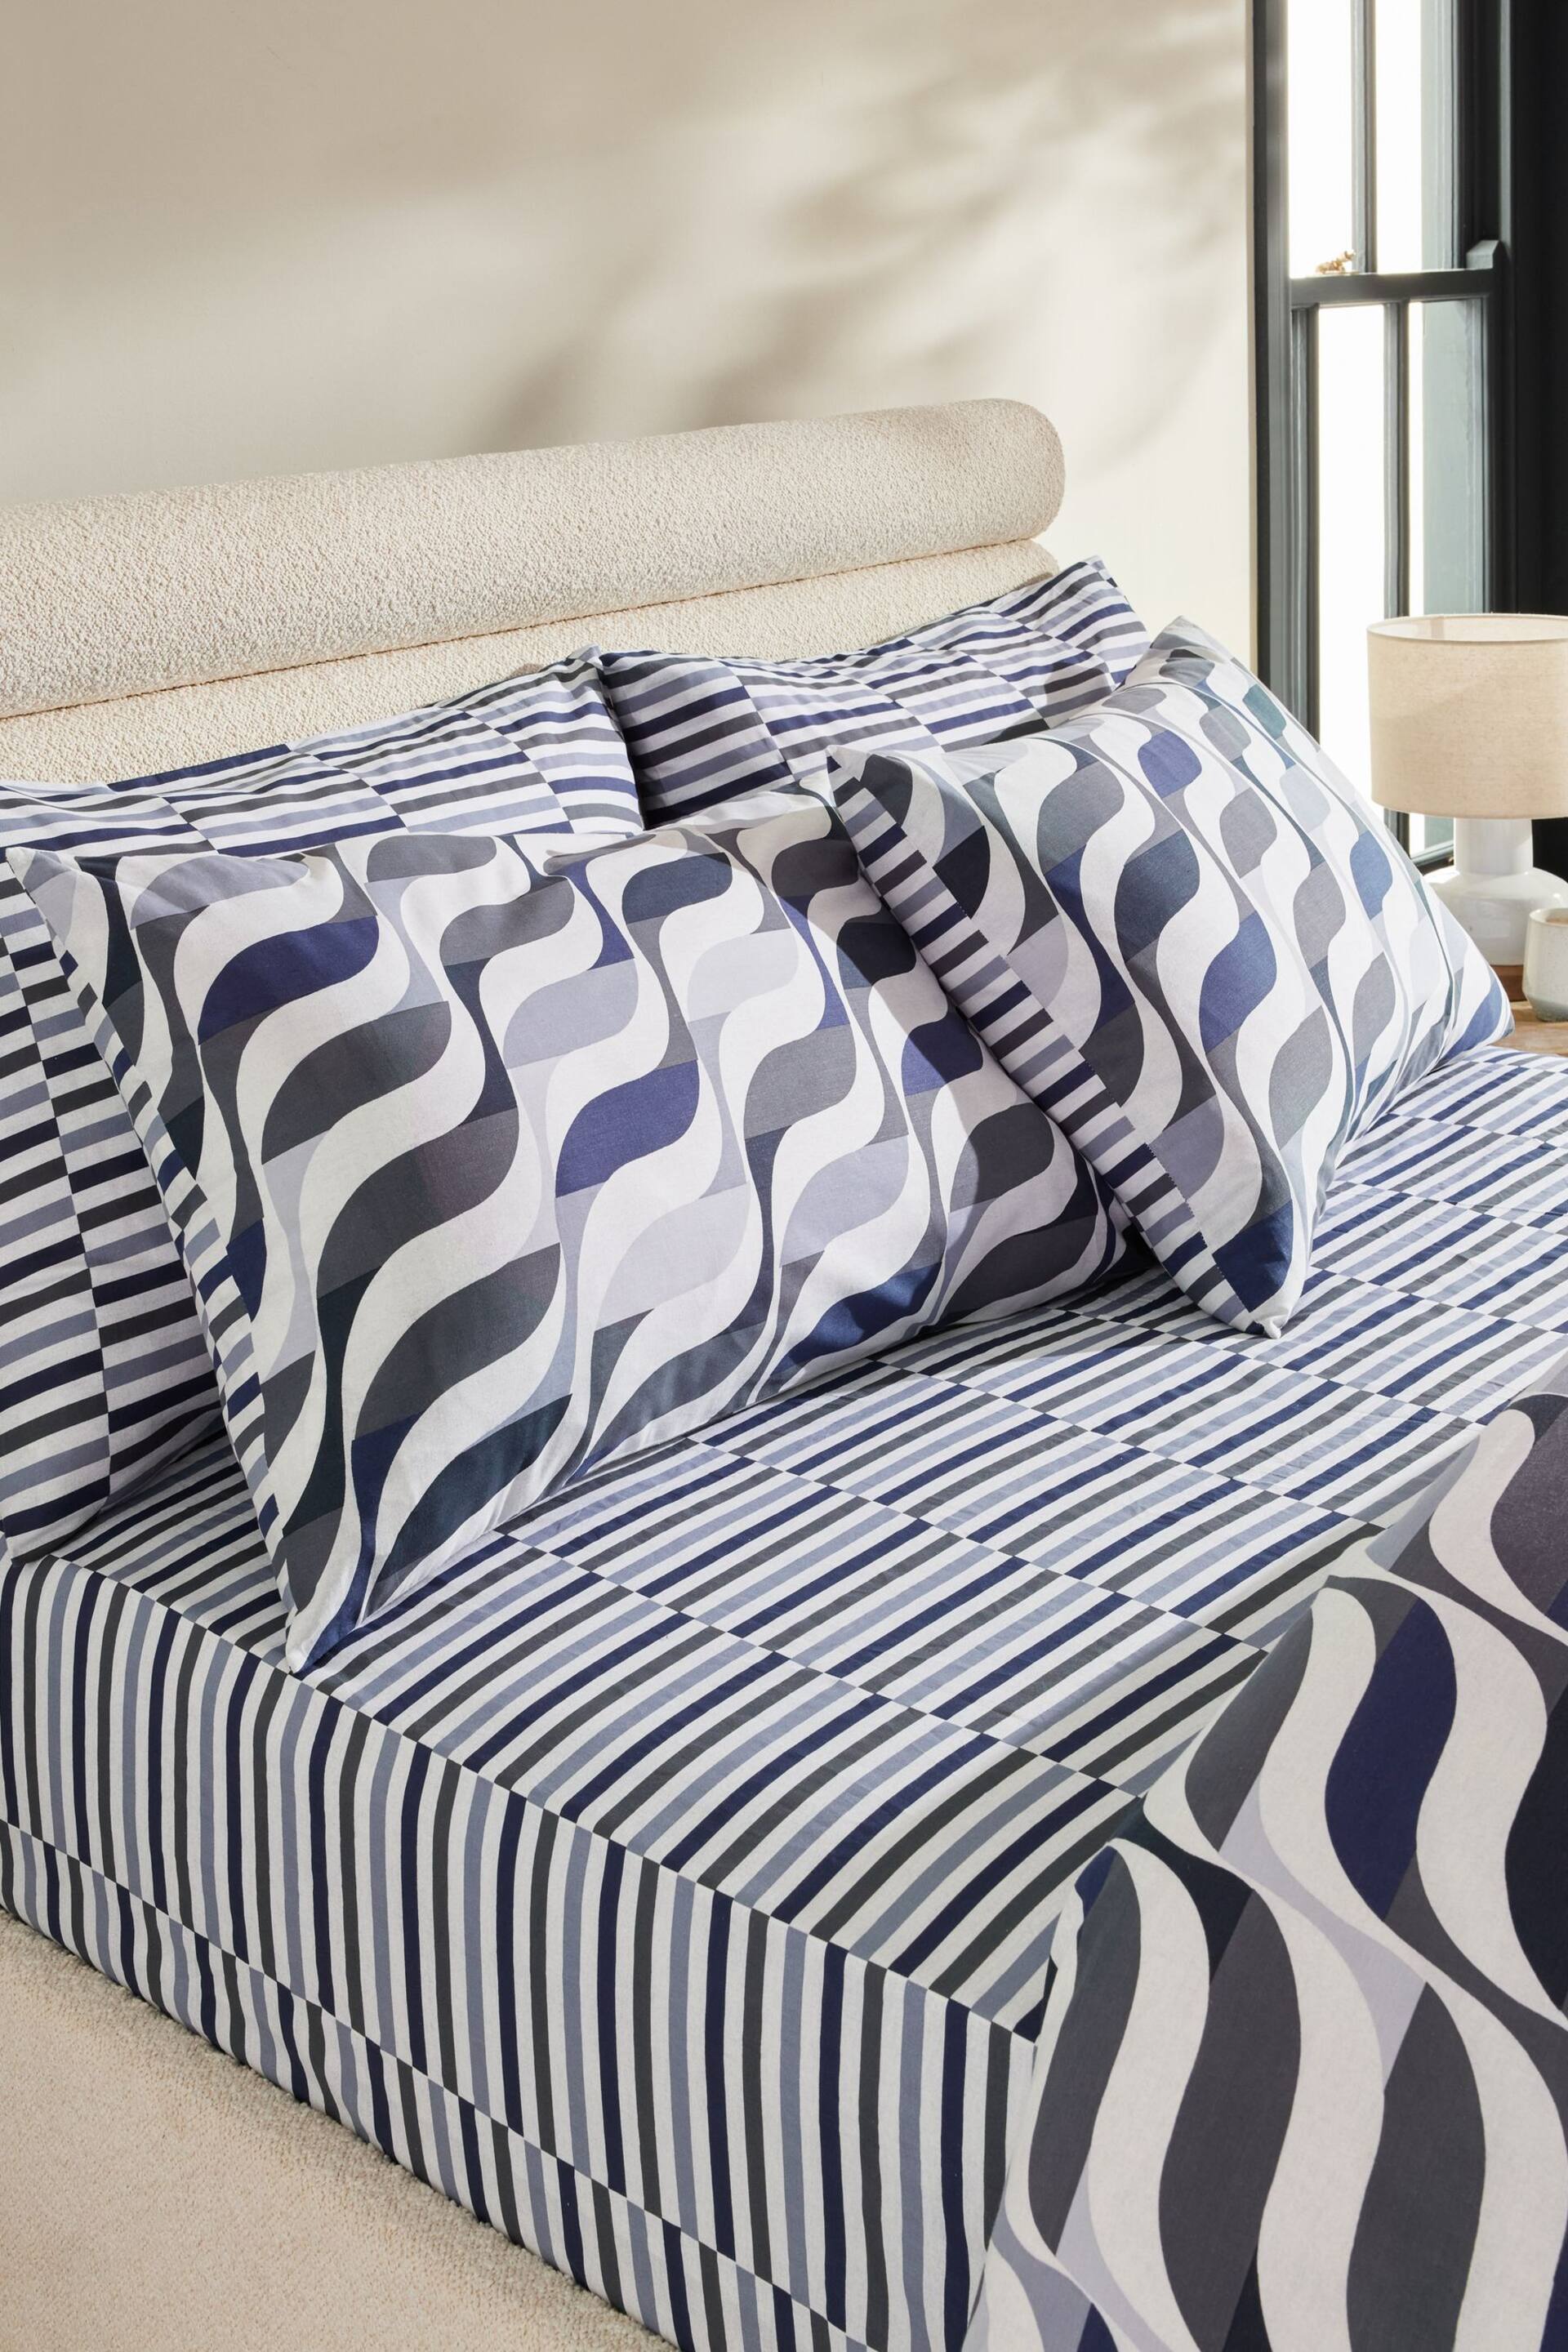 Blue Stripe 100% Cotton Printed Fitted Sheet And Pillowcase Set - Image 1 of 1